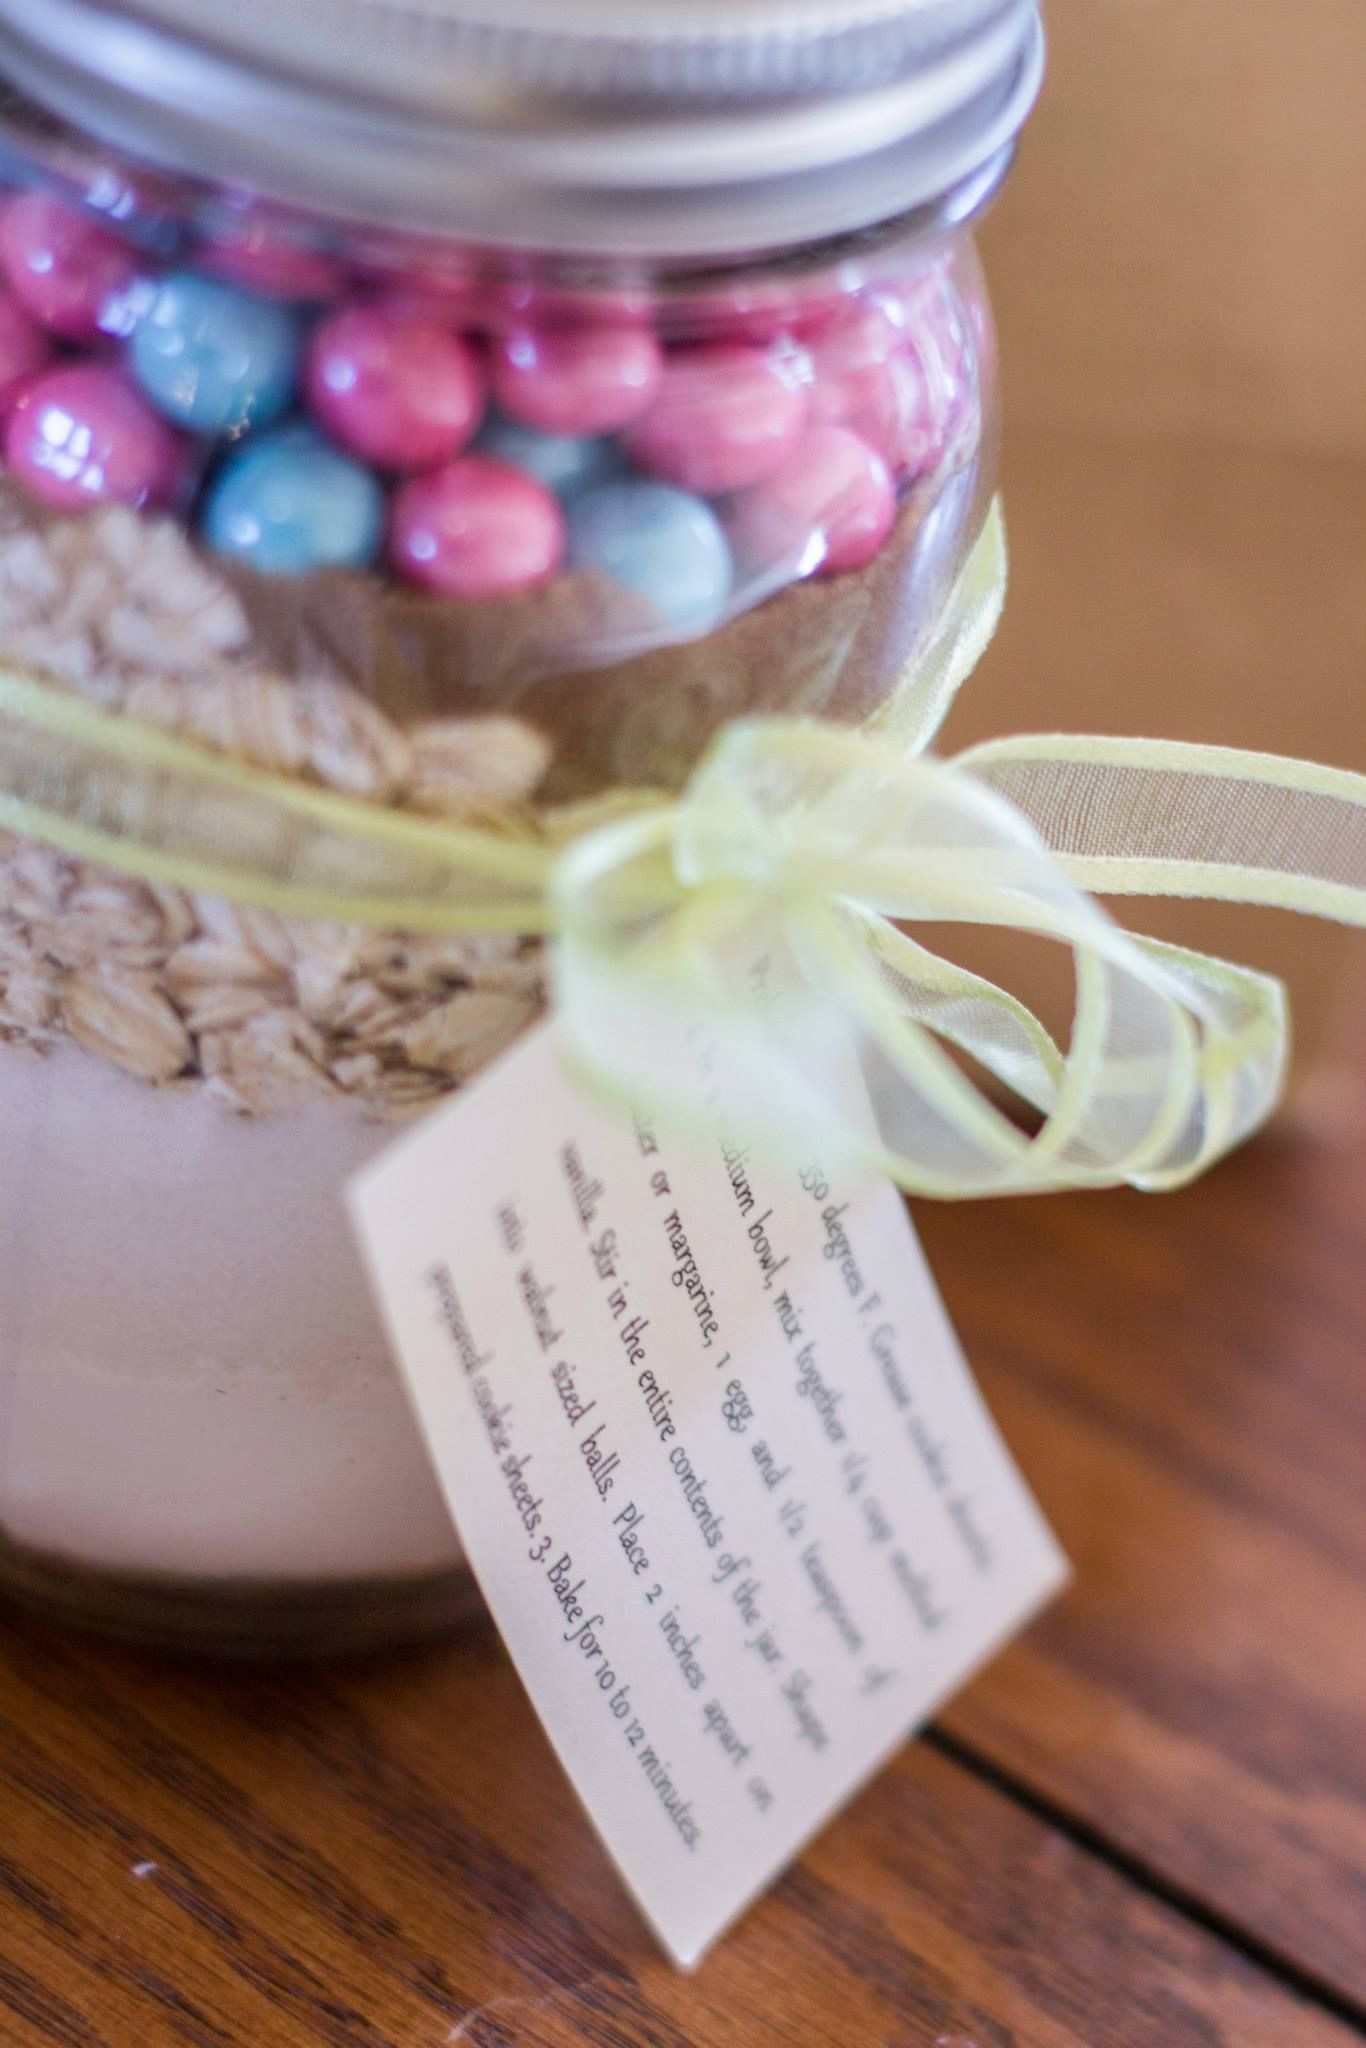 Mason Jar Gift Ideas For Baby Shower
 Baby Shower Party Favors Cookie Mix in a Mason Jar Easy